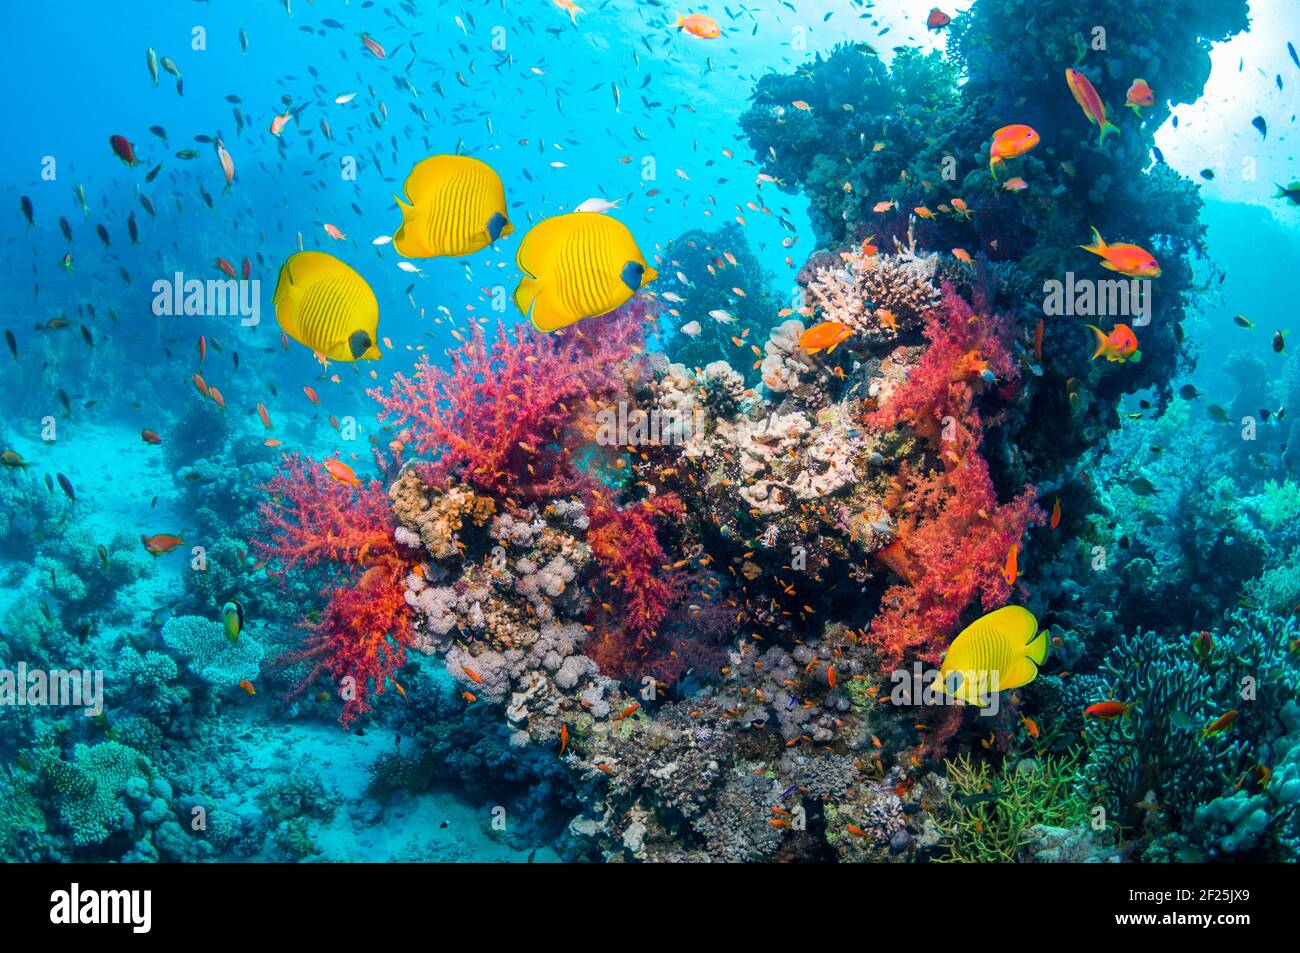 Golden butterflyfish swimming over coral reef with soft corals.  Egypt, Red Sea. Stock Photo